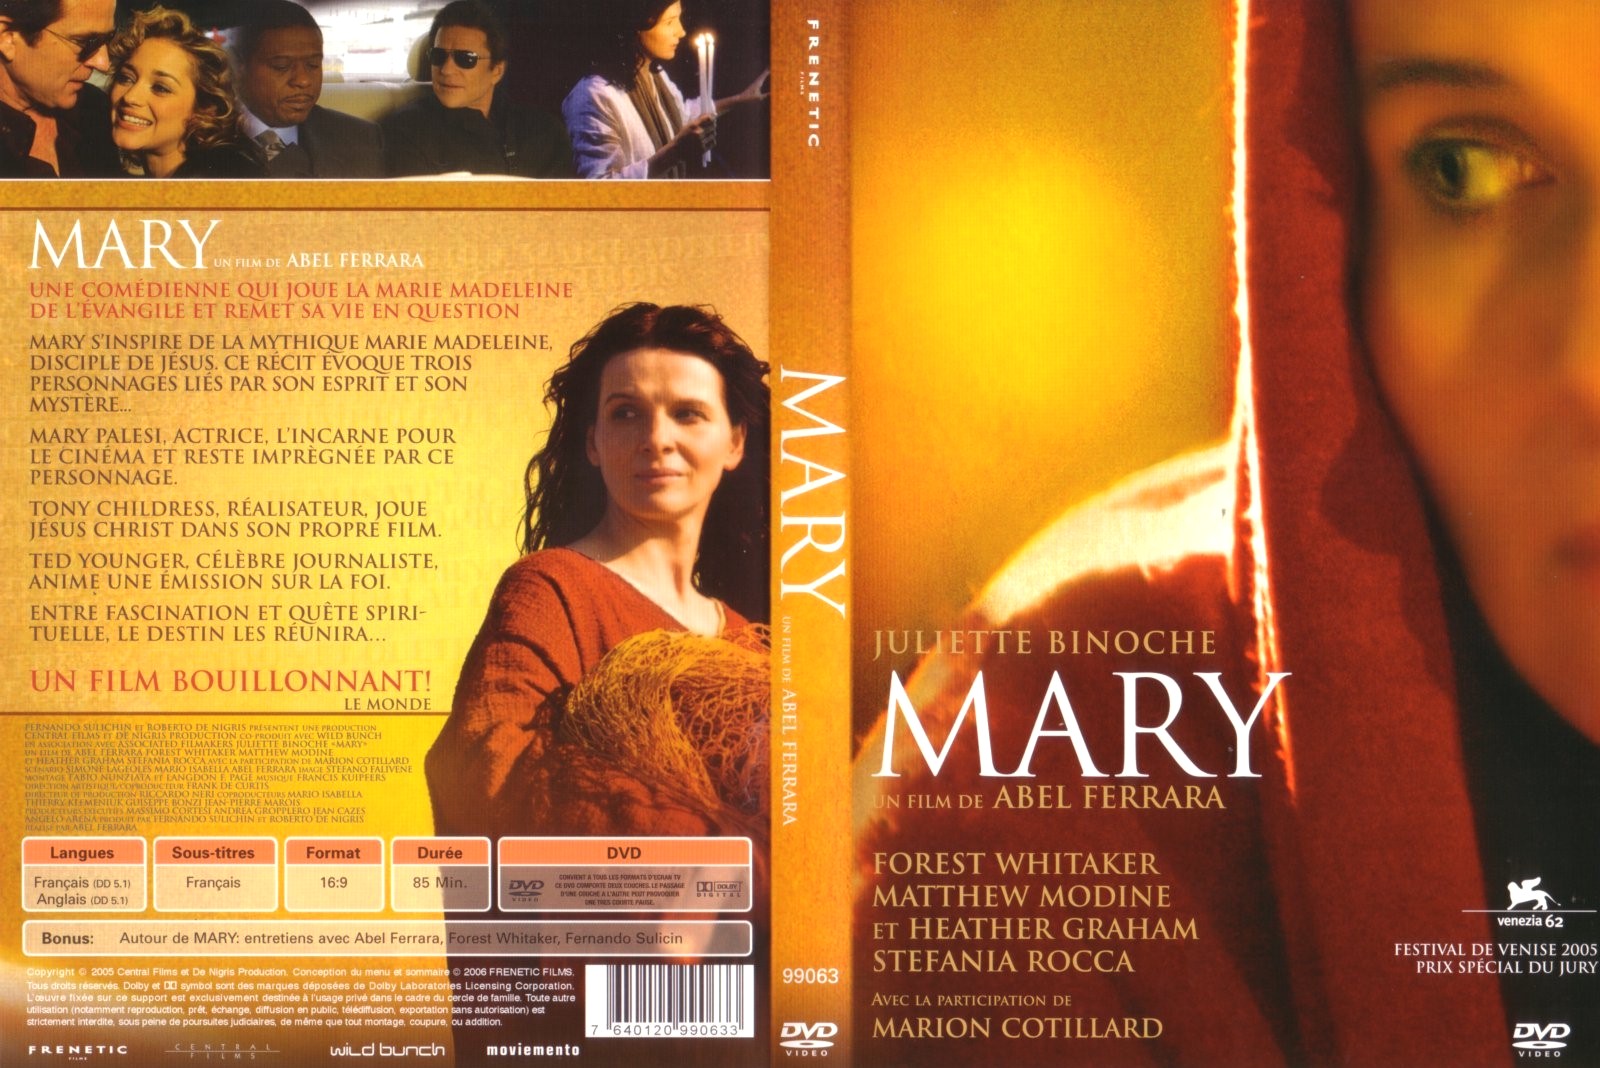 Jaquette DVD Mary